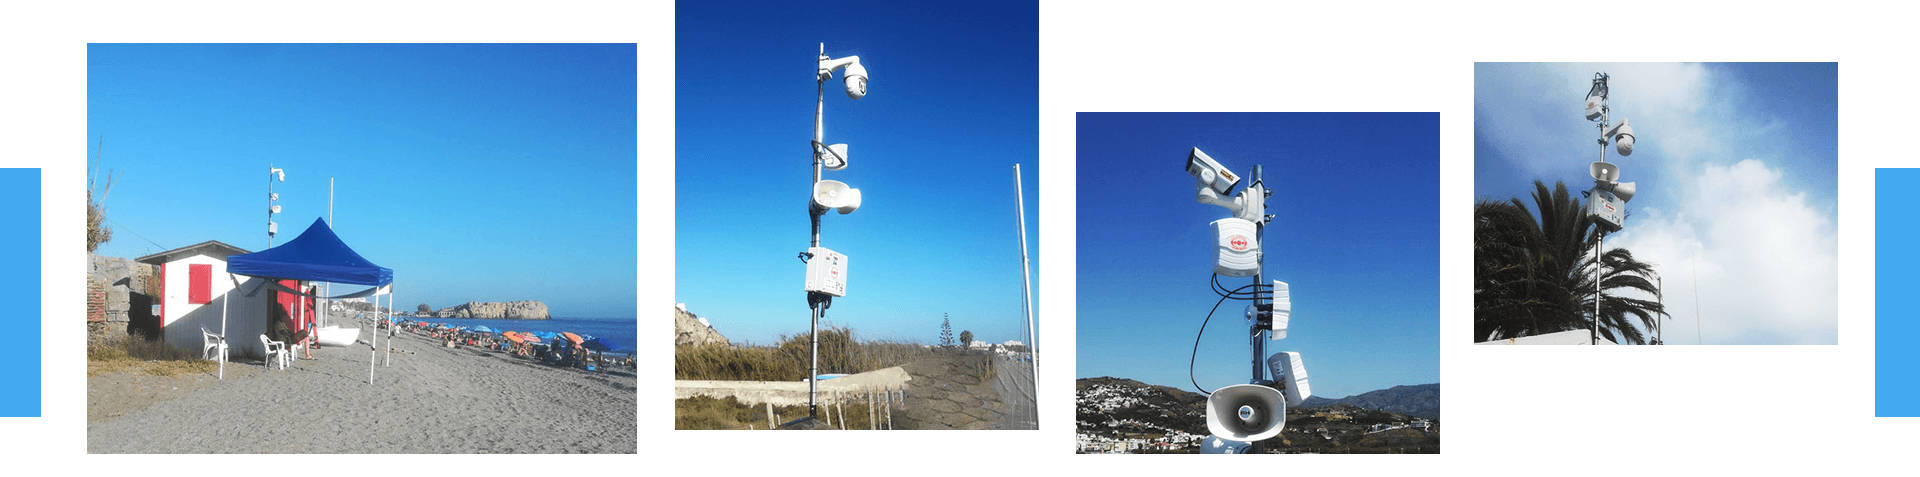 Milesight PTZ camera series provides the all-round monitoring on the beach